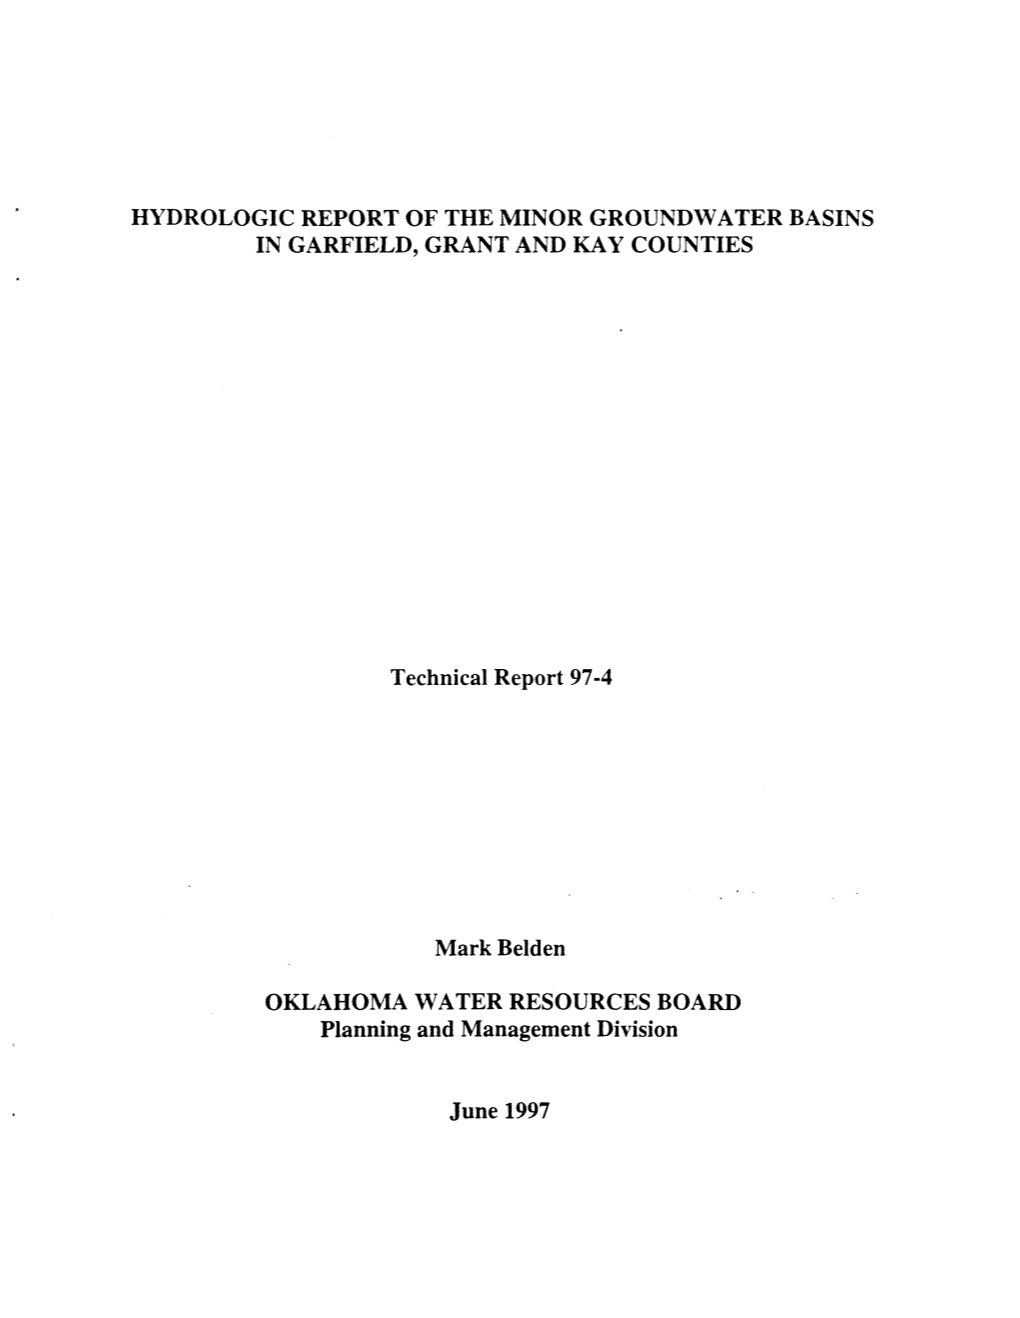 Hydrologic Report of the Minor Groundwater Basins in Garfield, Grant and Kay Counties